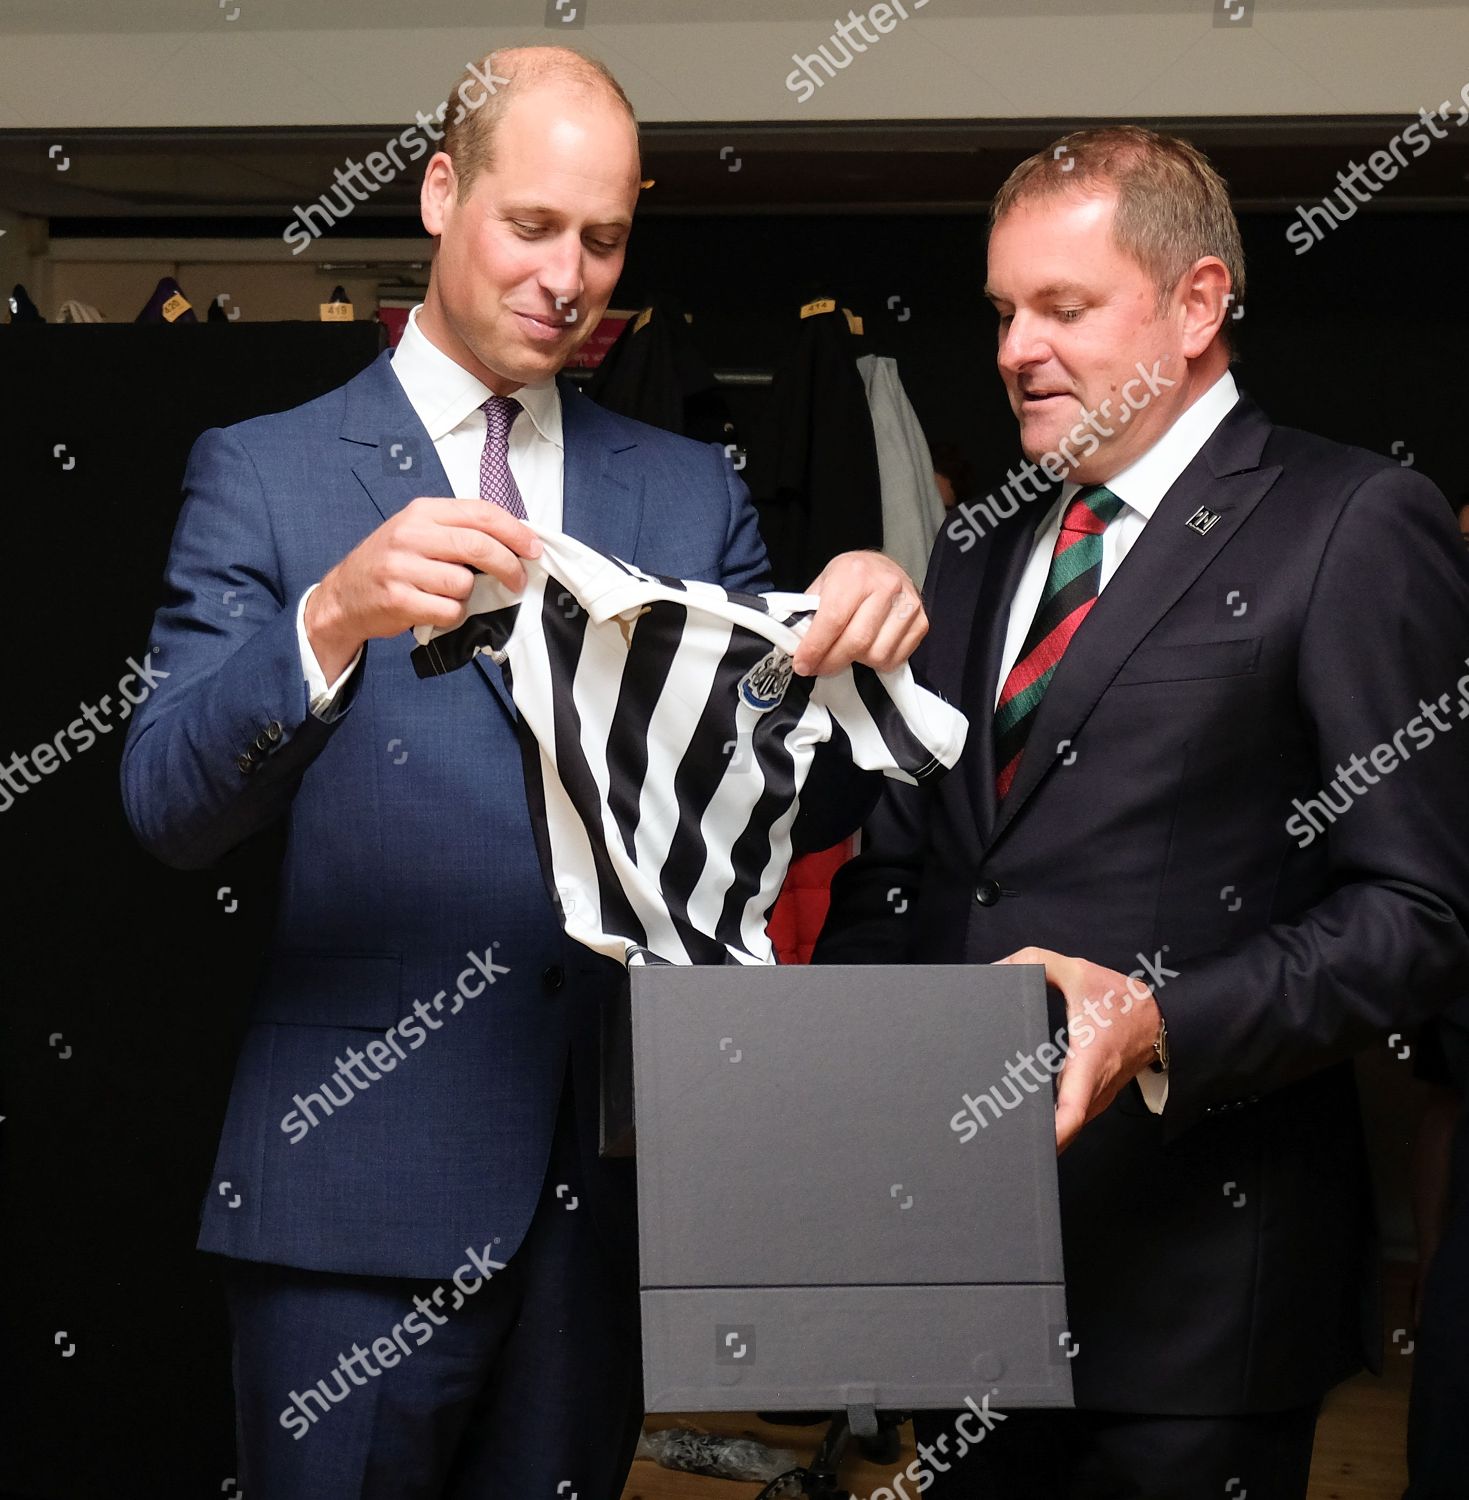 prince-william-visit-to-the-great-exhibition-of-the-north-newcastle-uk-shutterstock-editorial-9876204d.jpg